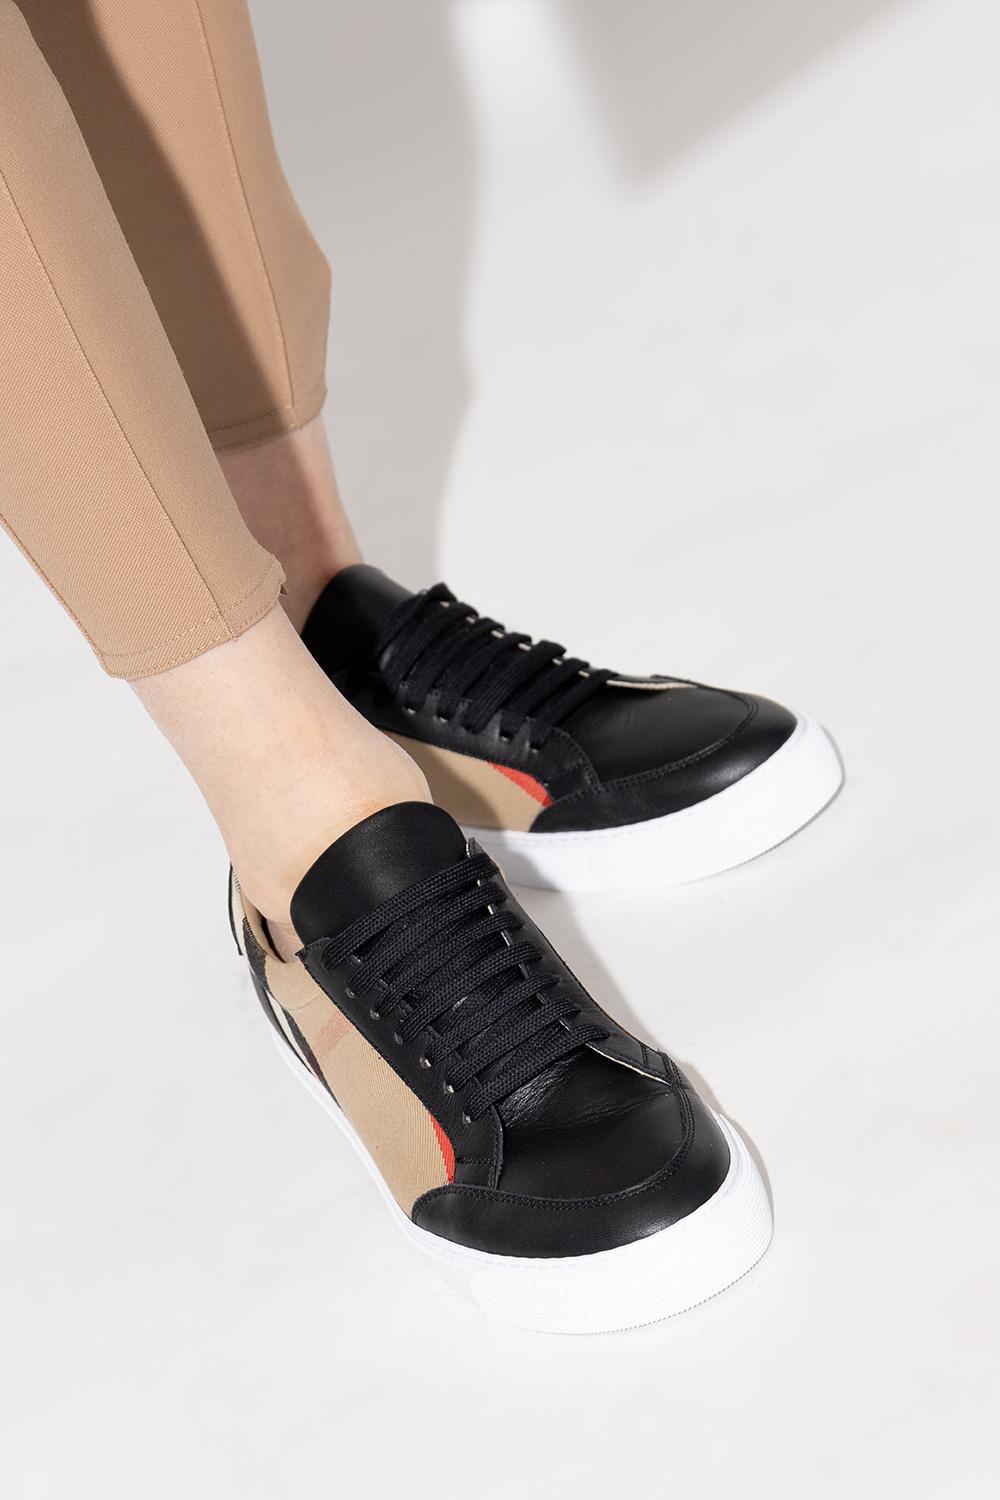 Burberry 'new Salmond' Sneakers in Black | Lyst